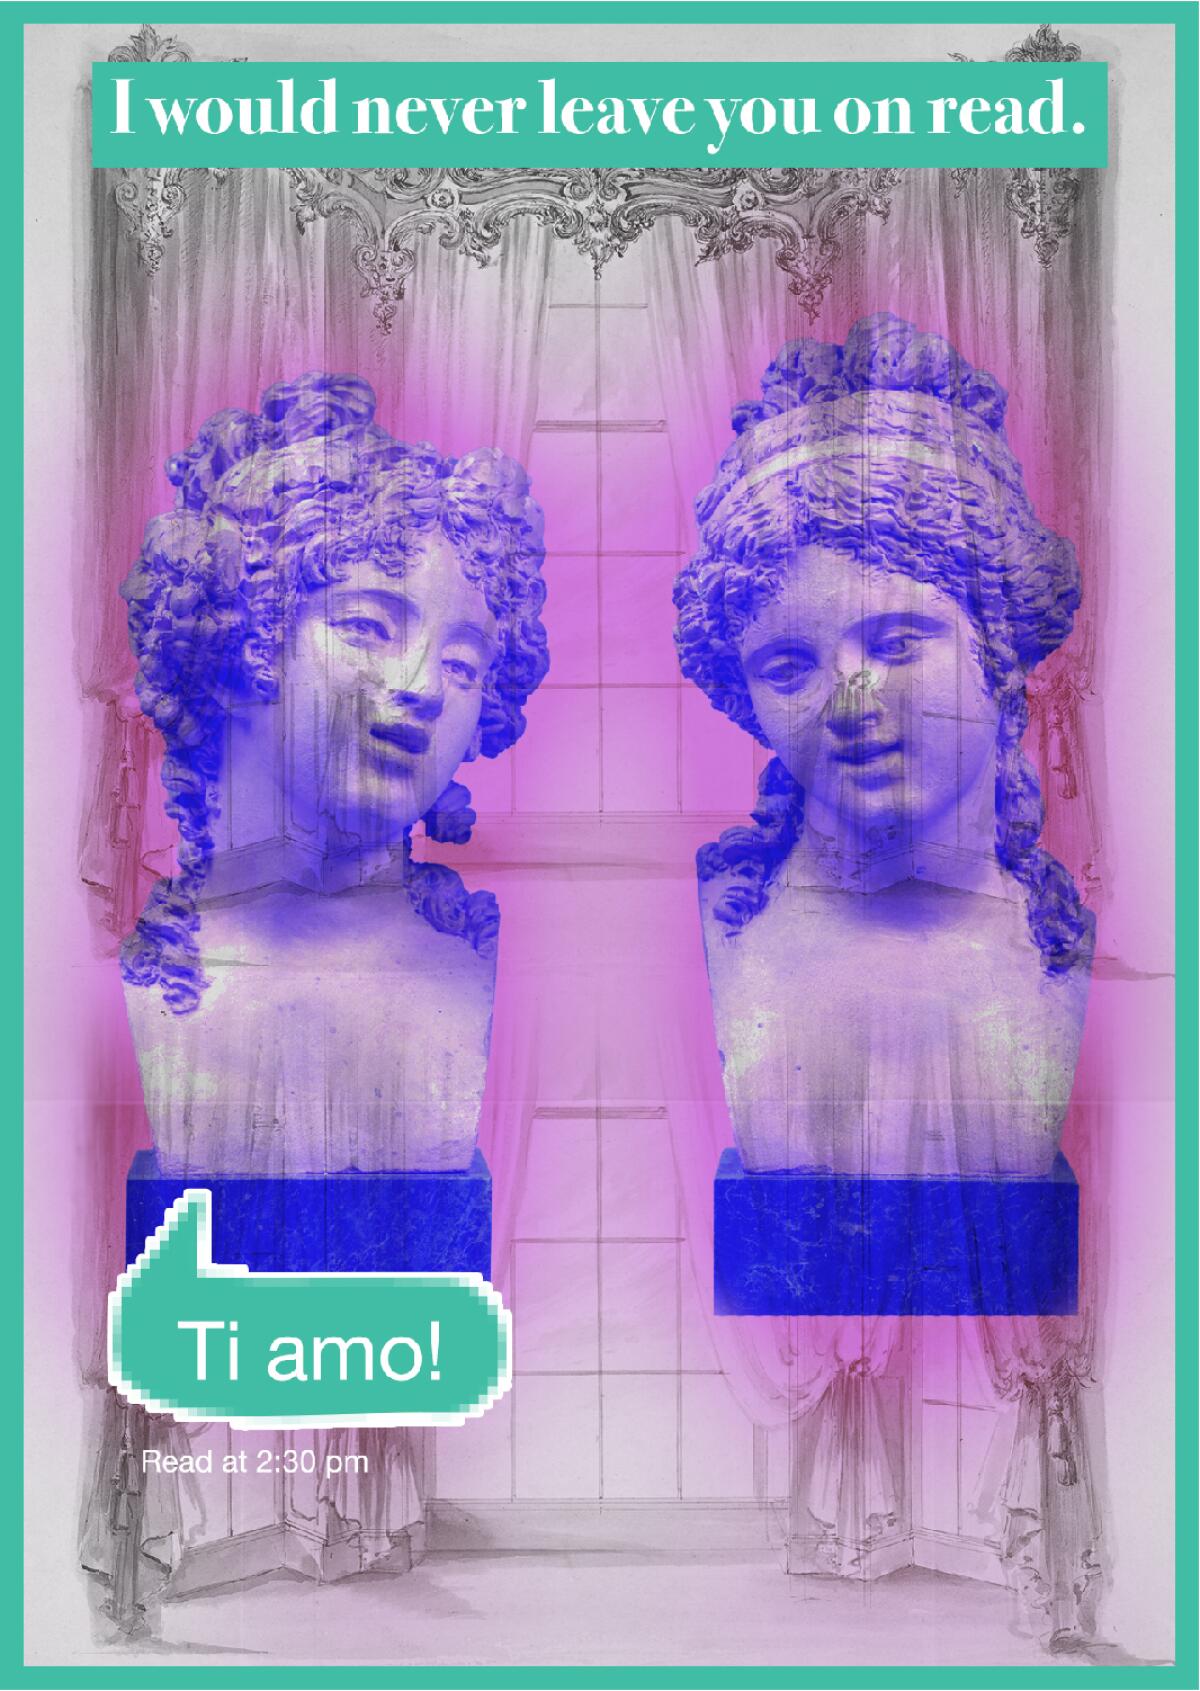 Joseph-Charles Marin's "Female Bust" with "Ti amo!" in text bubble paired with phrase "I would never leave you on read."